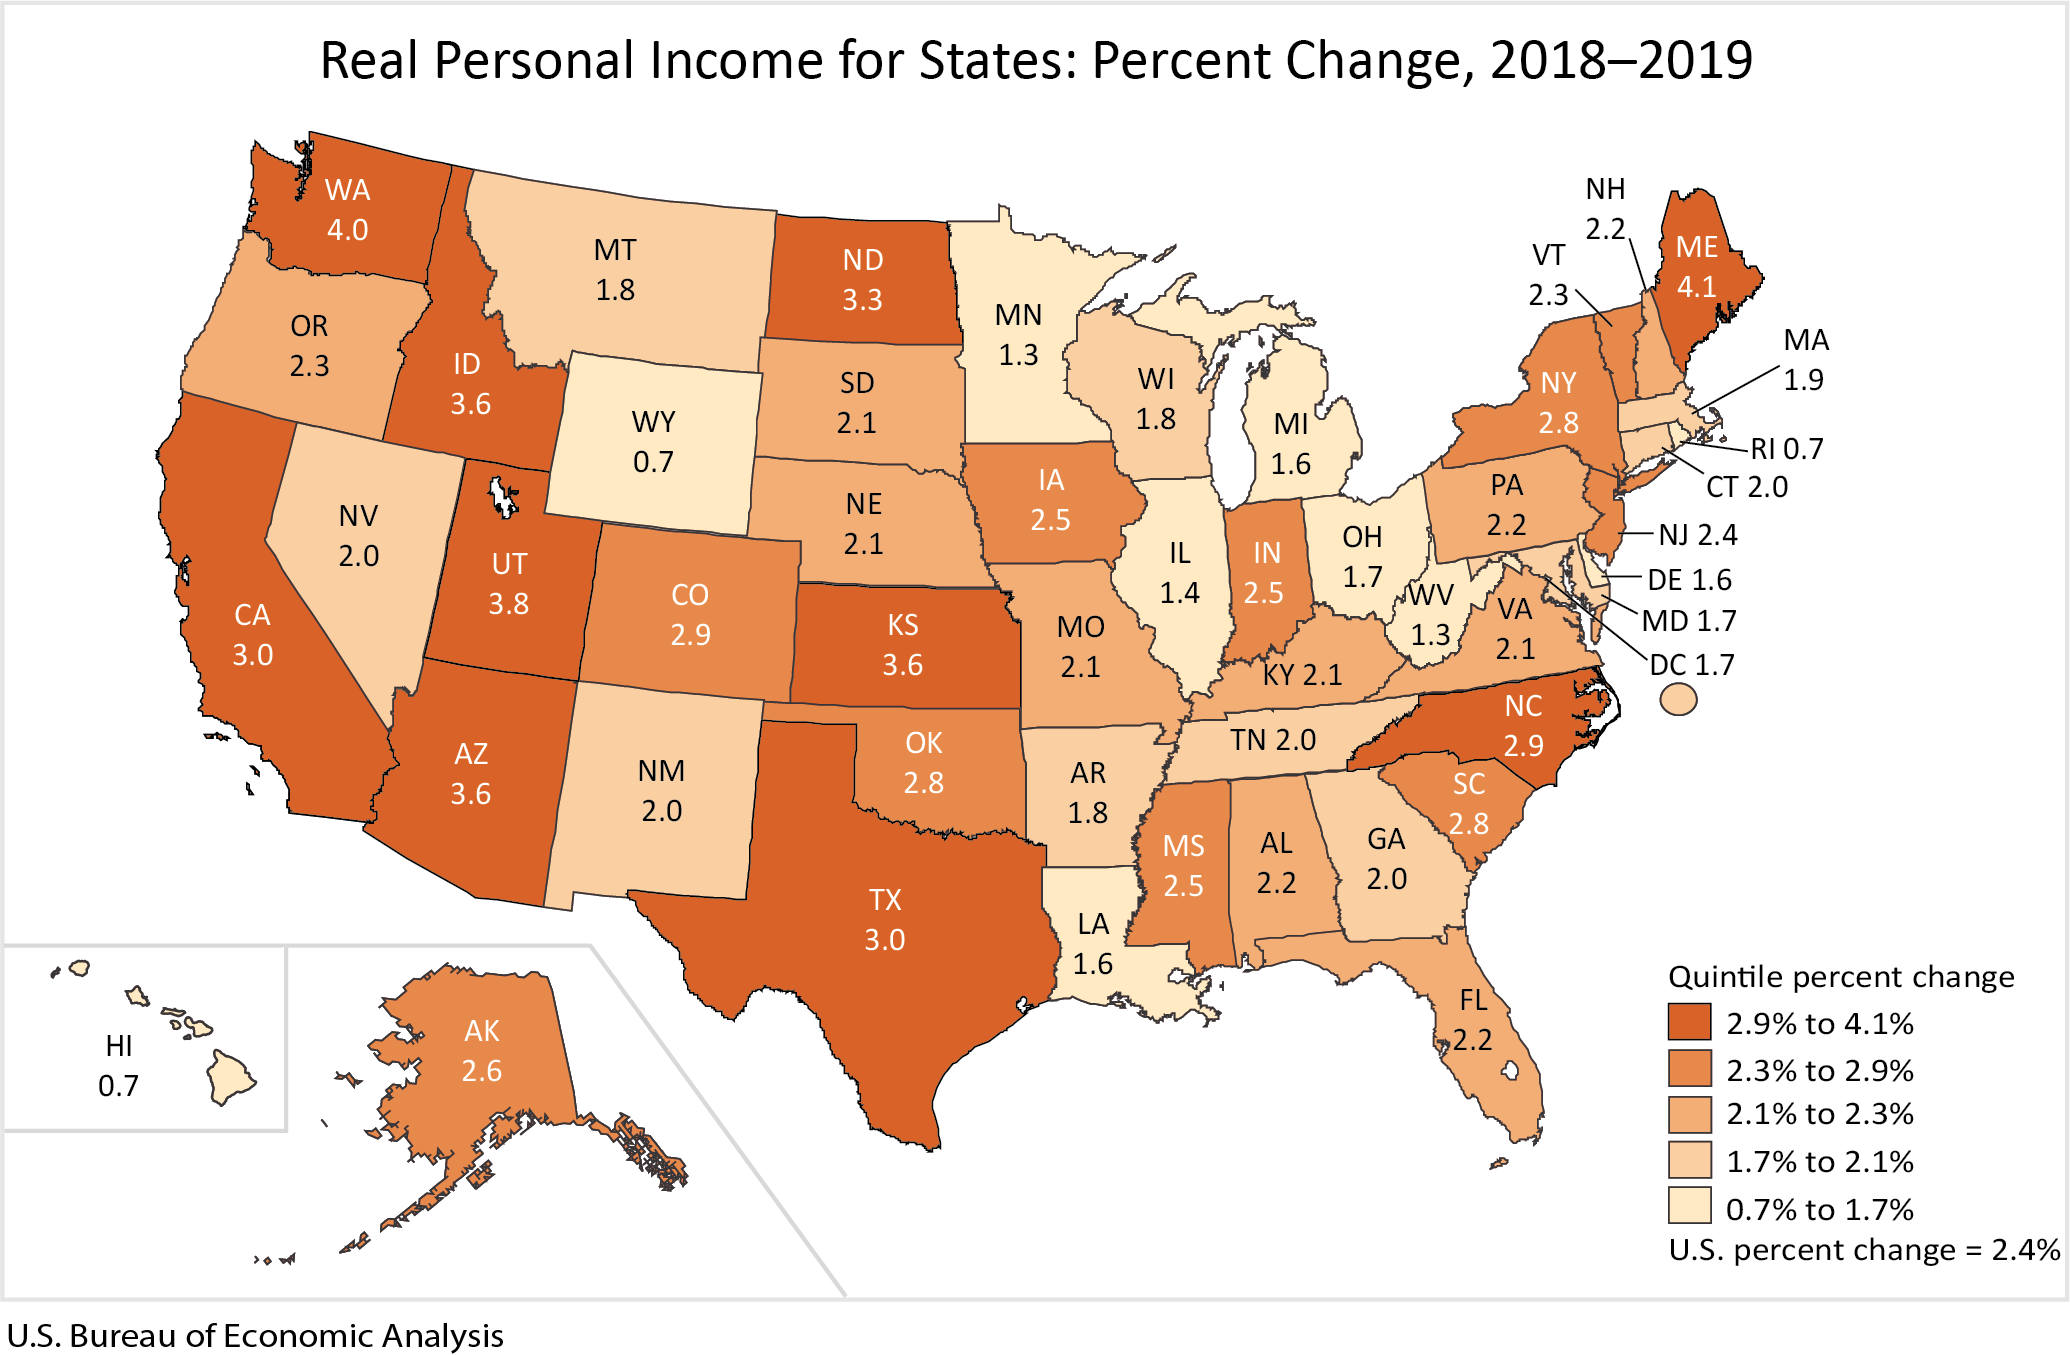 Real Personal Income for States: Percent Change, 2018-2019